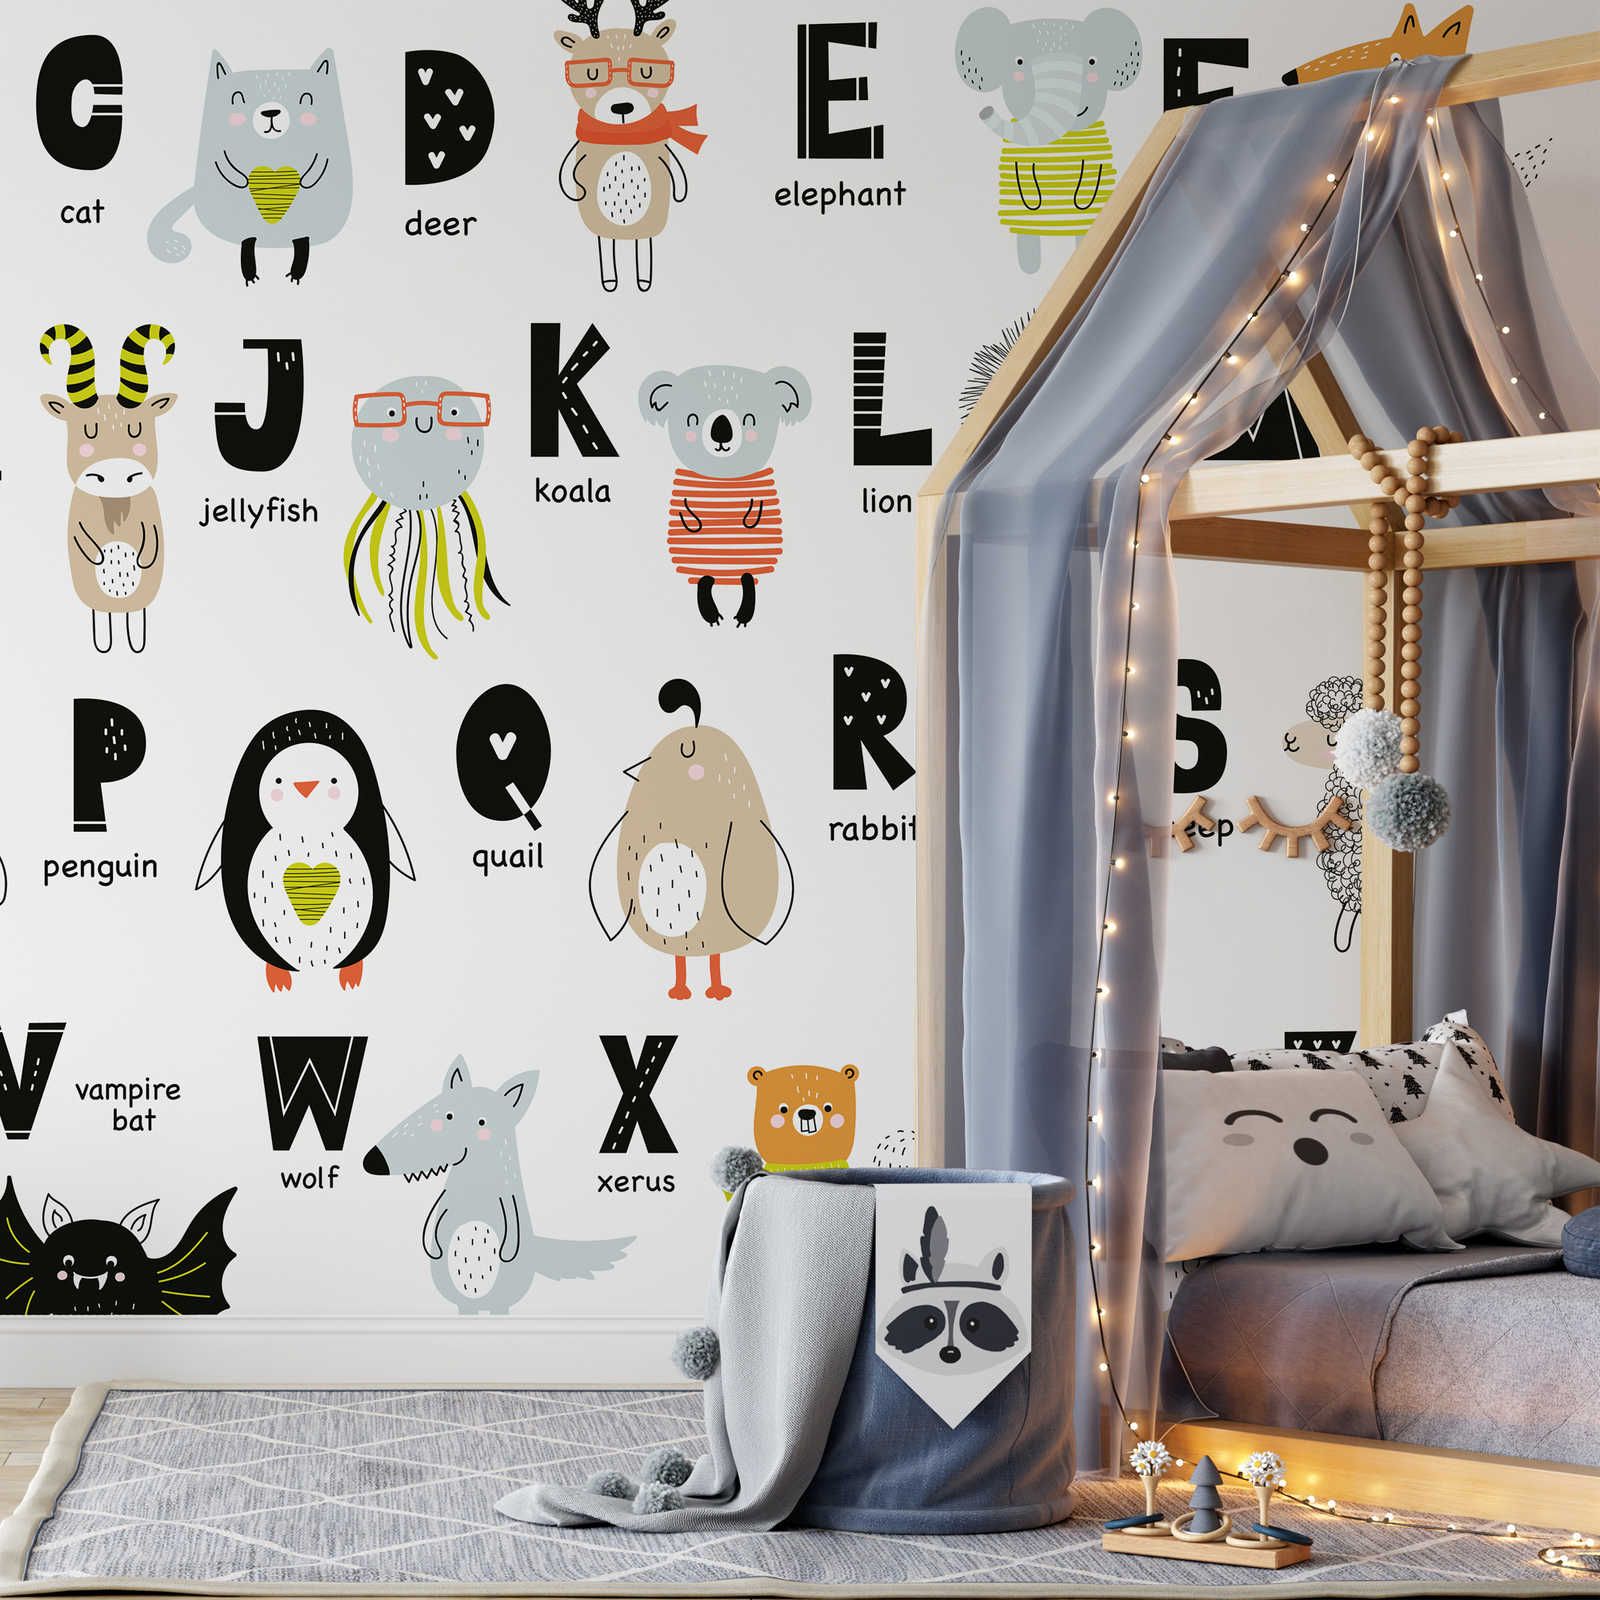 Photo wallpaper Alphabet with animals and animal names - textured non-woven
